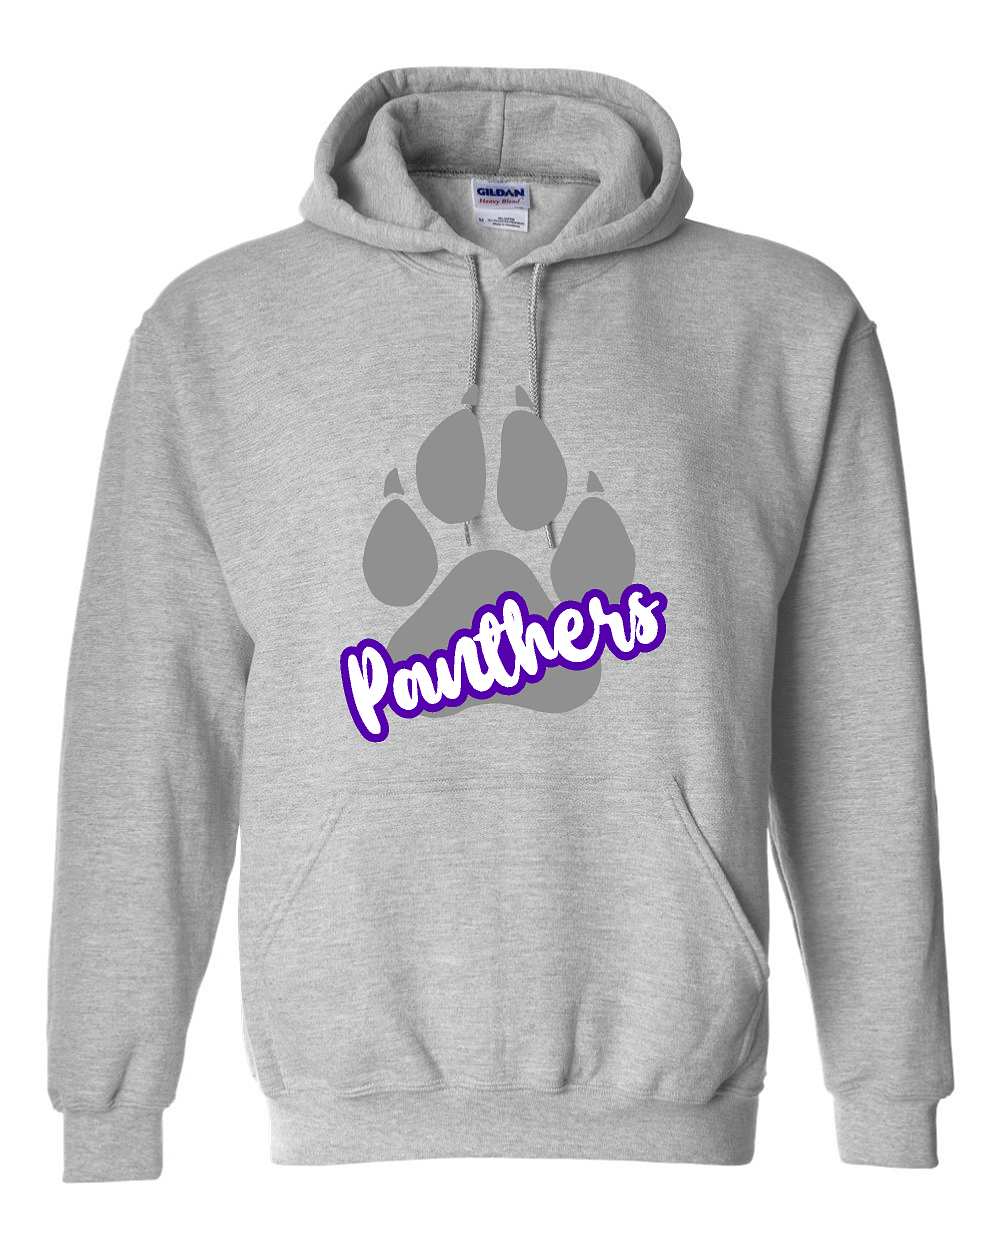 Andover Panther gray on gray Hoodie 18500